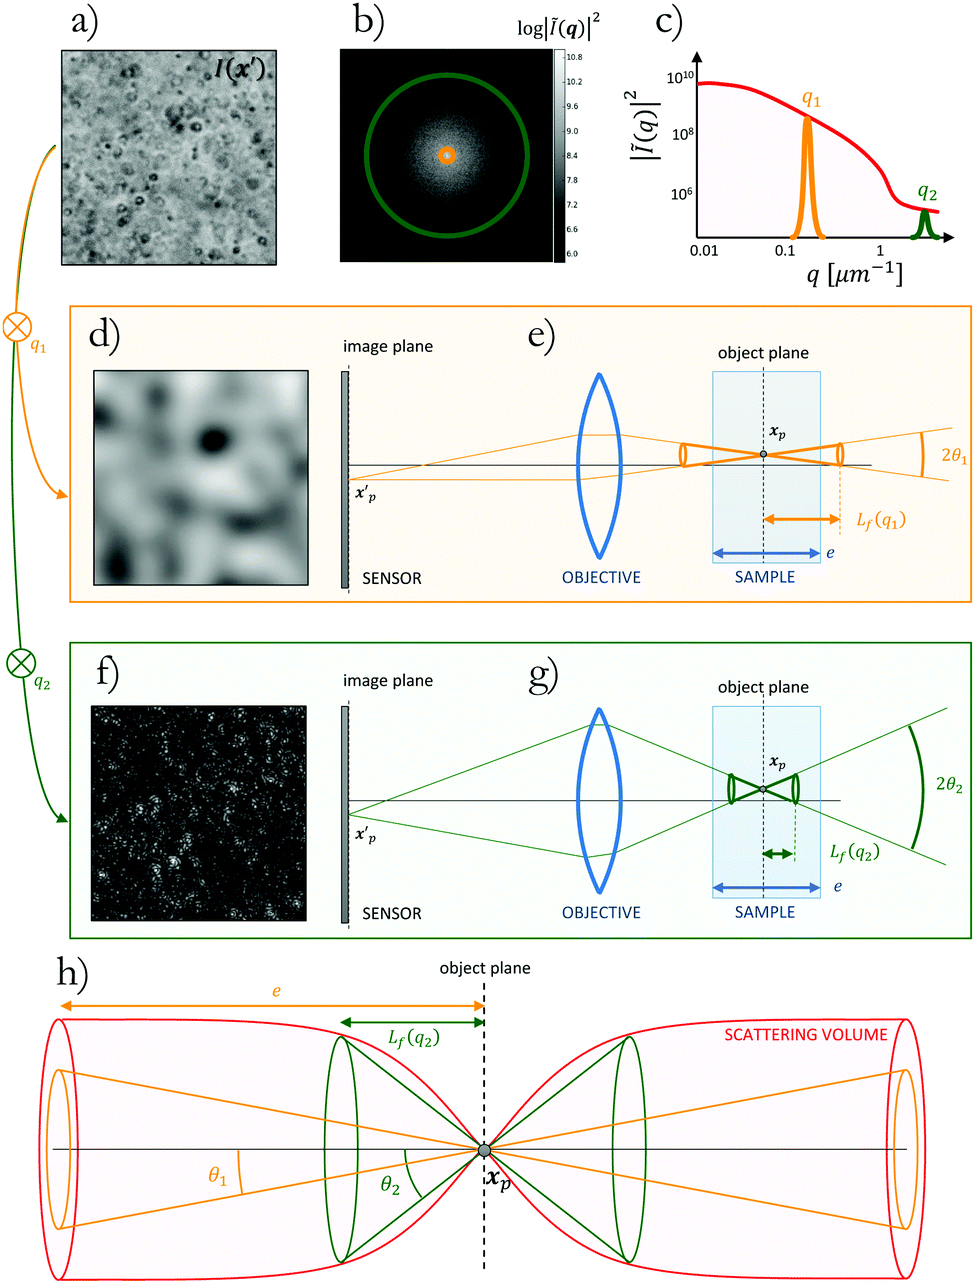 Probing Shear Induced Rearrangements In Fourier Space Ii Differential Dynamic Microscopy Soft Matter Rsc Publishing